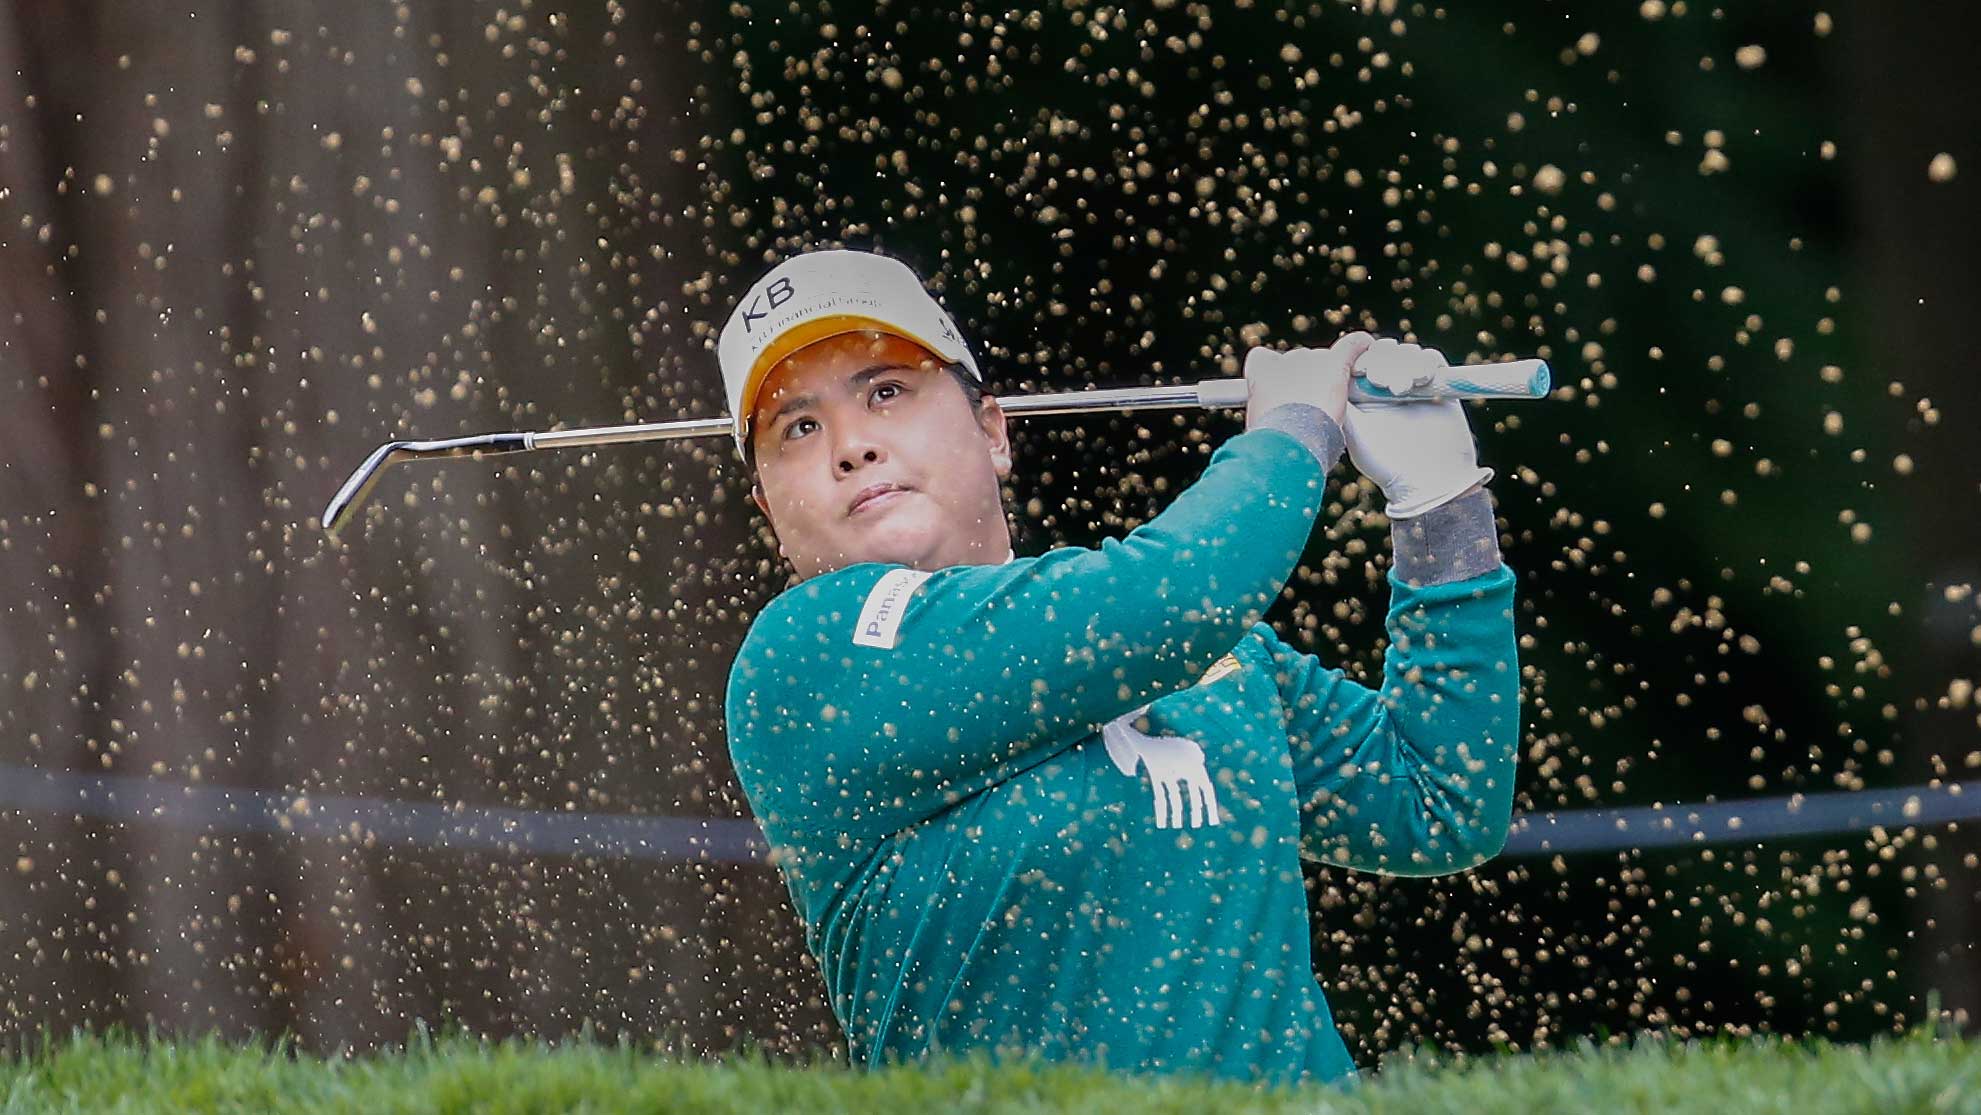 Inbee Park of South Korea hits out of the bunker on the 12th hole during the second round of the KPMG Women's PGA Championship